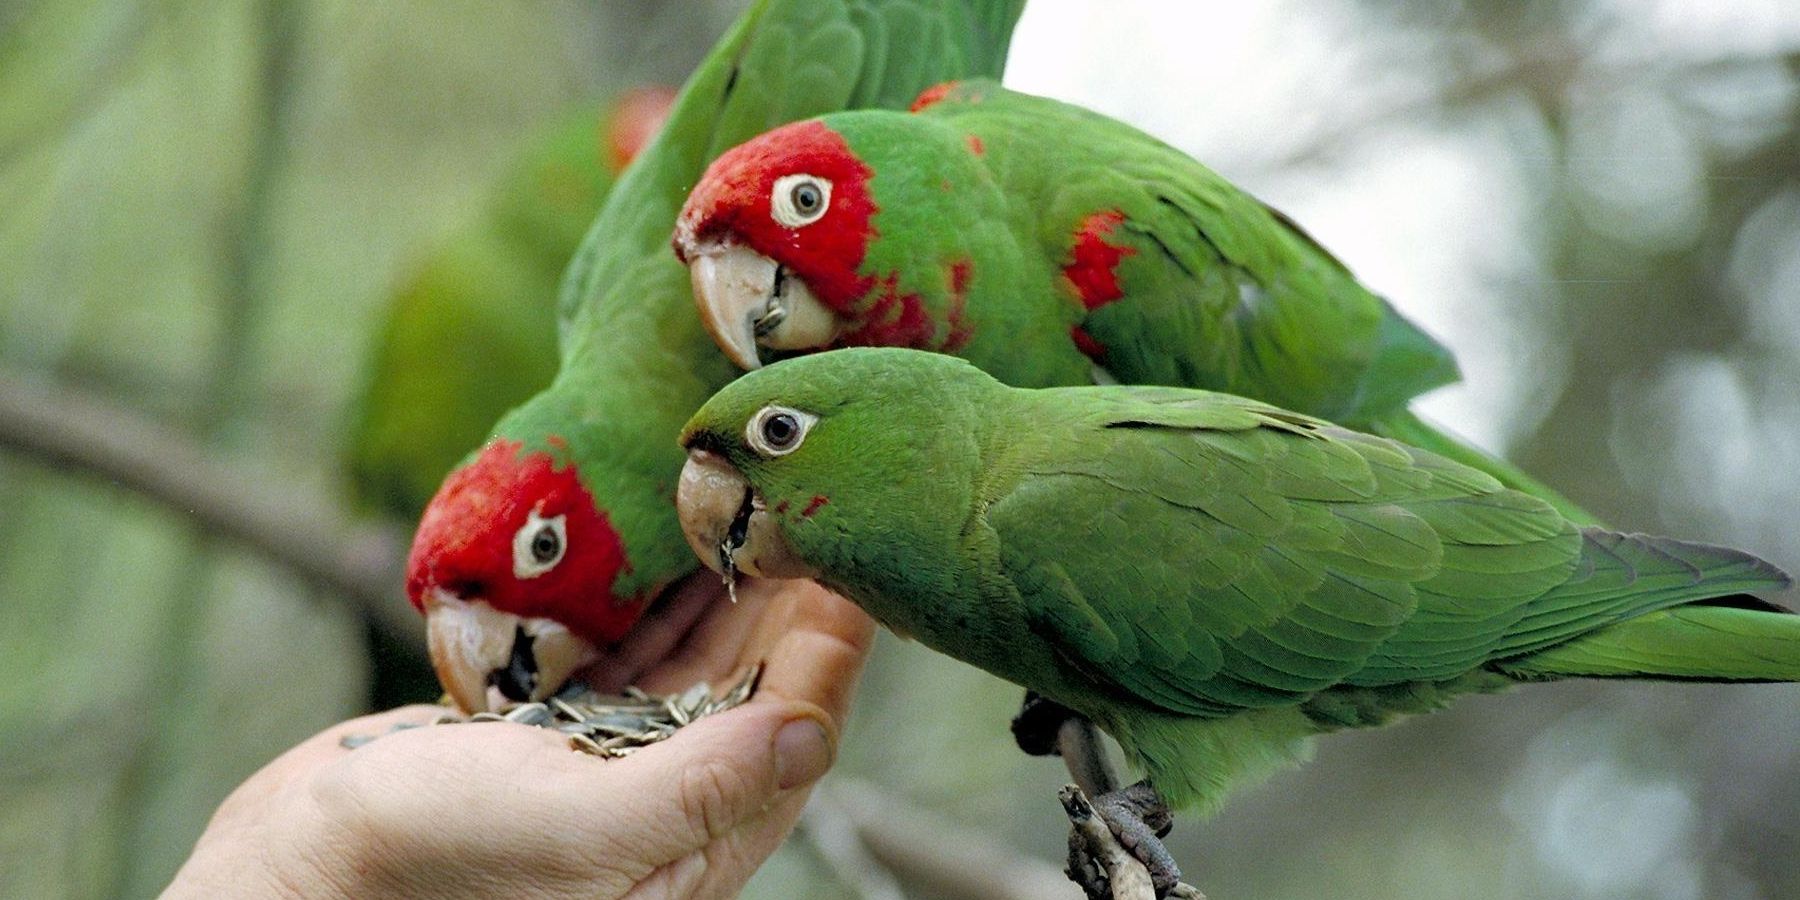 parrots eating seeds out of hand